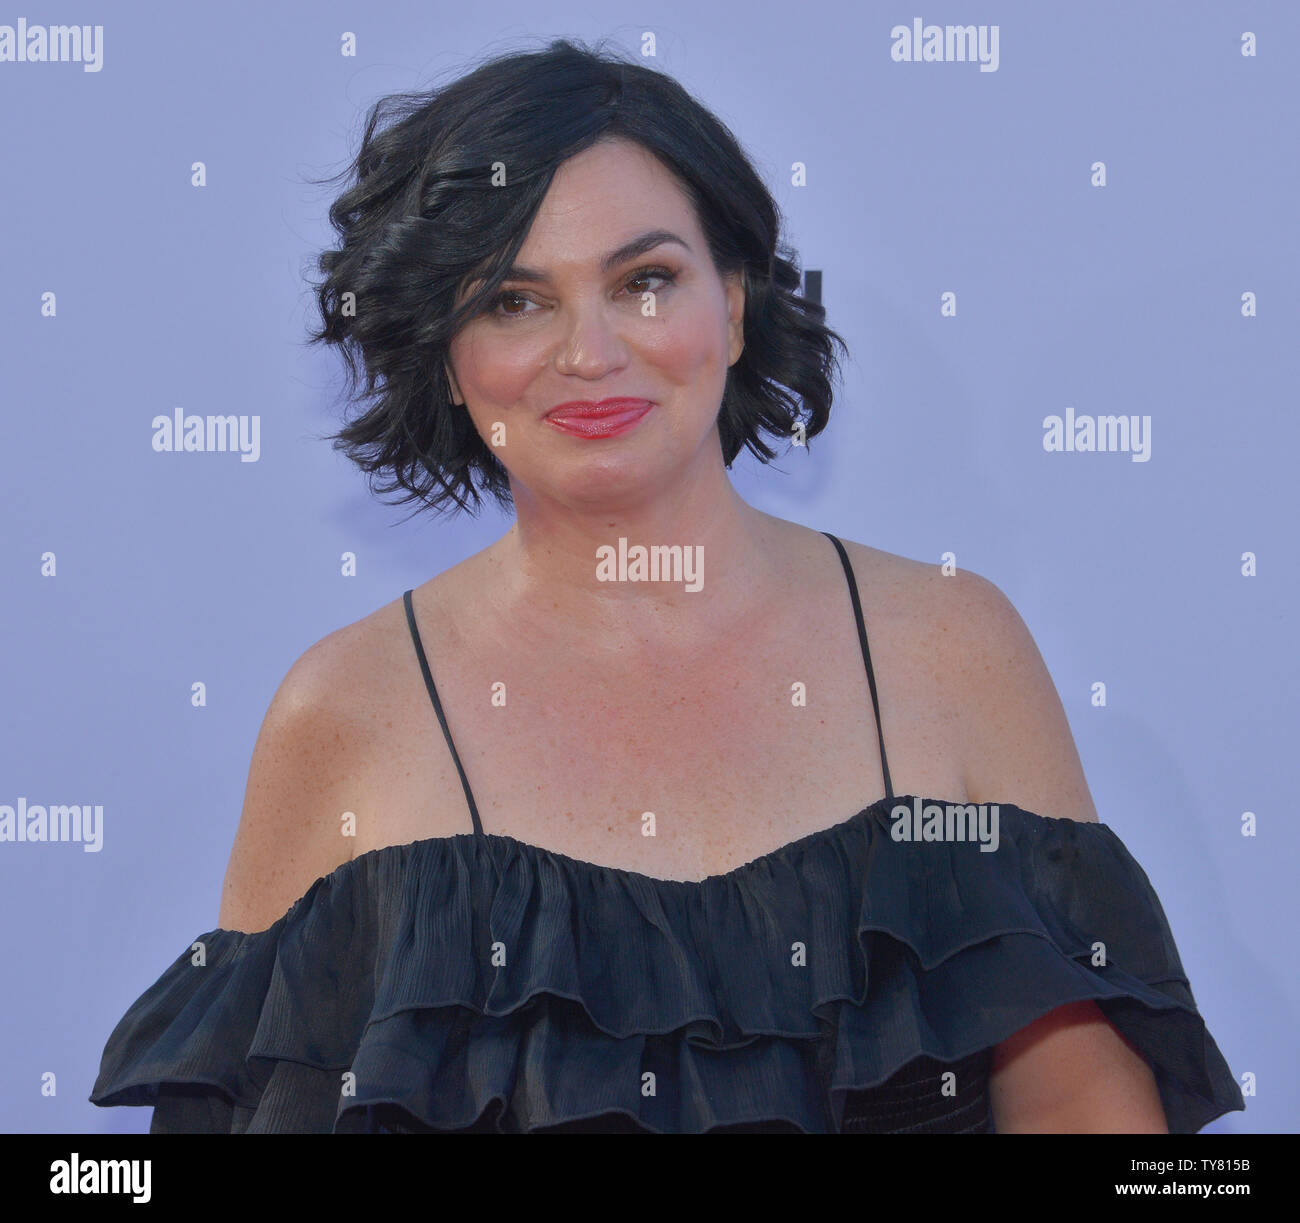 Karen Duffy High Resolution Stock Photography and Images - Alamy